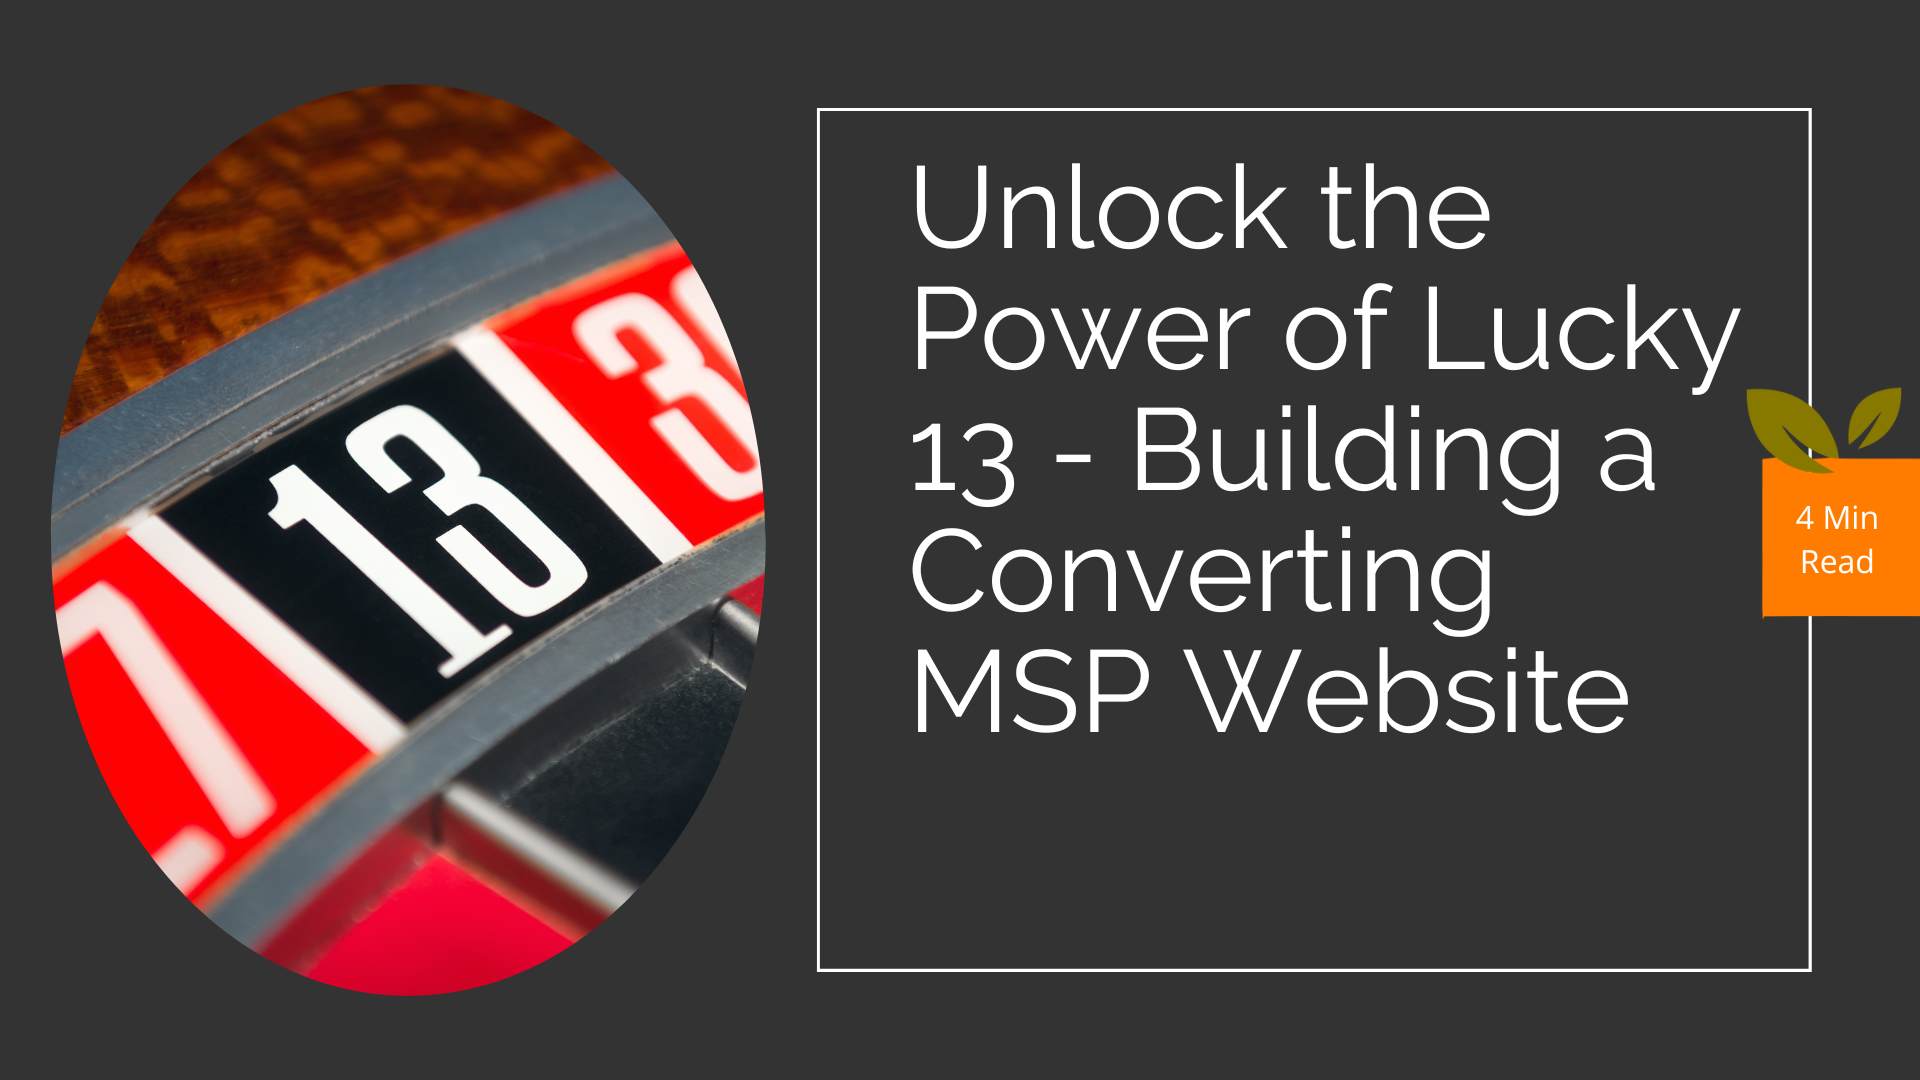 How to Build a Converting MSP Website